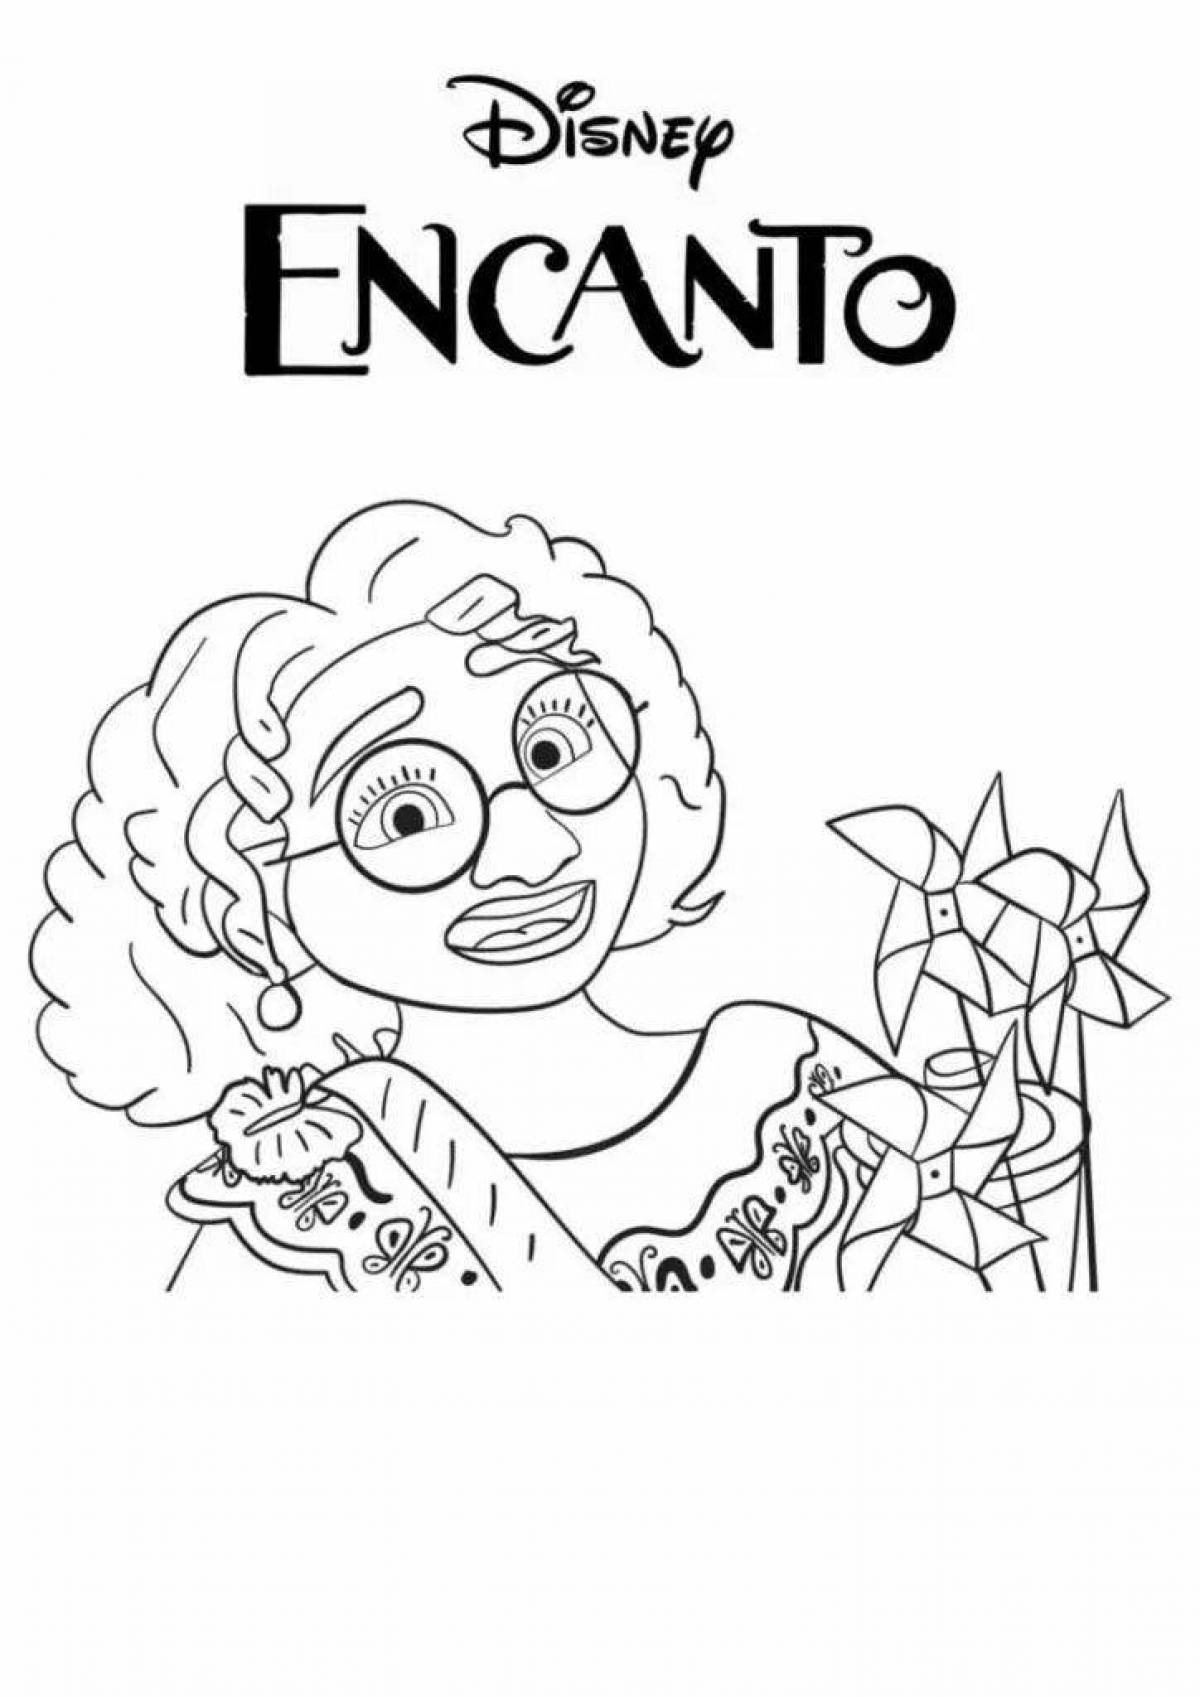 Incanto awesome coloring book